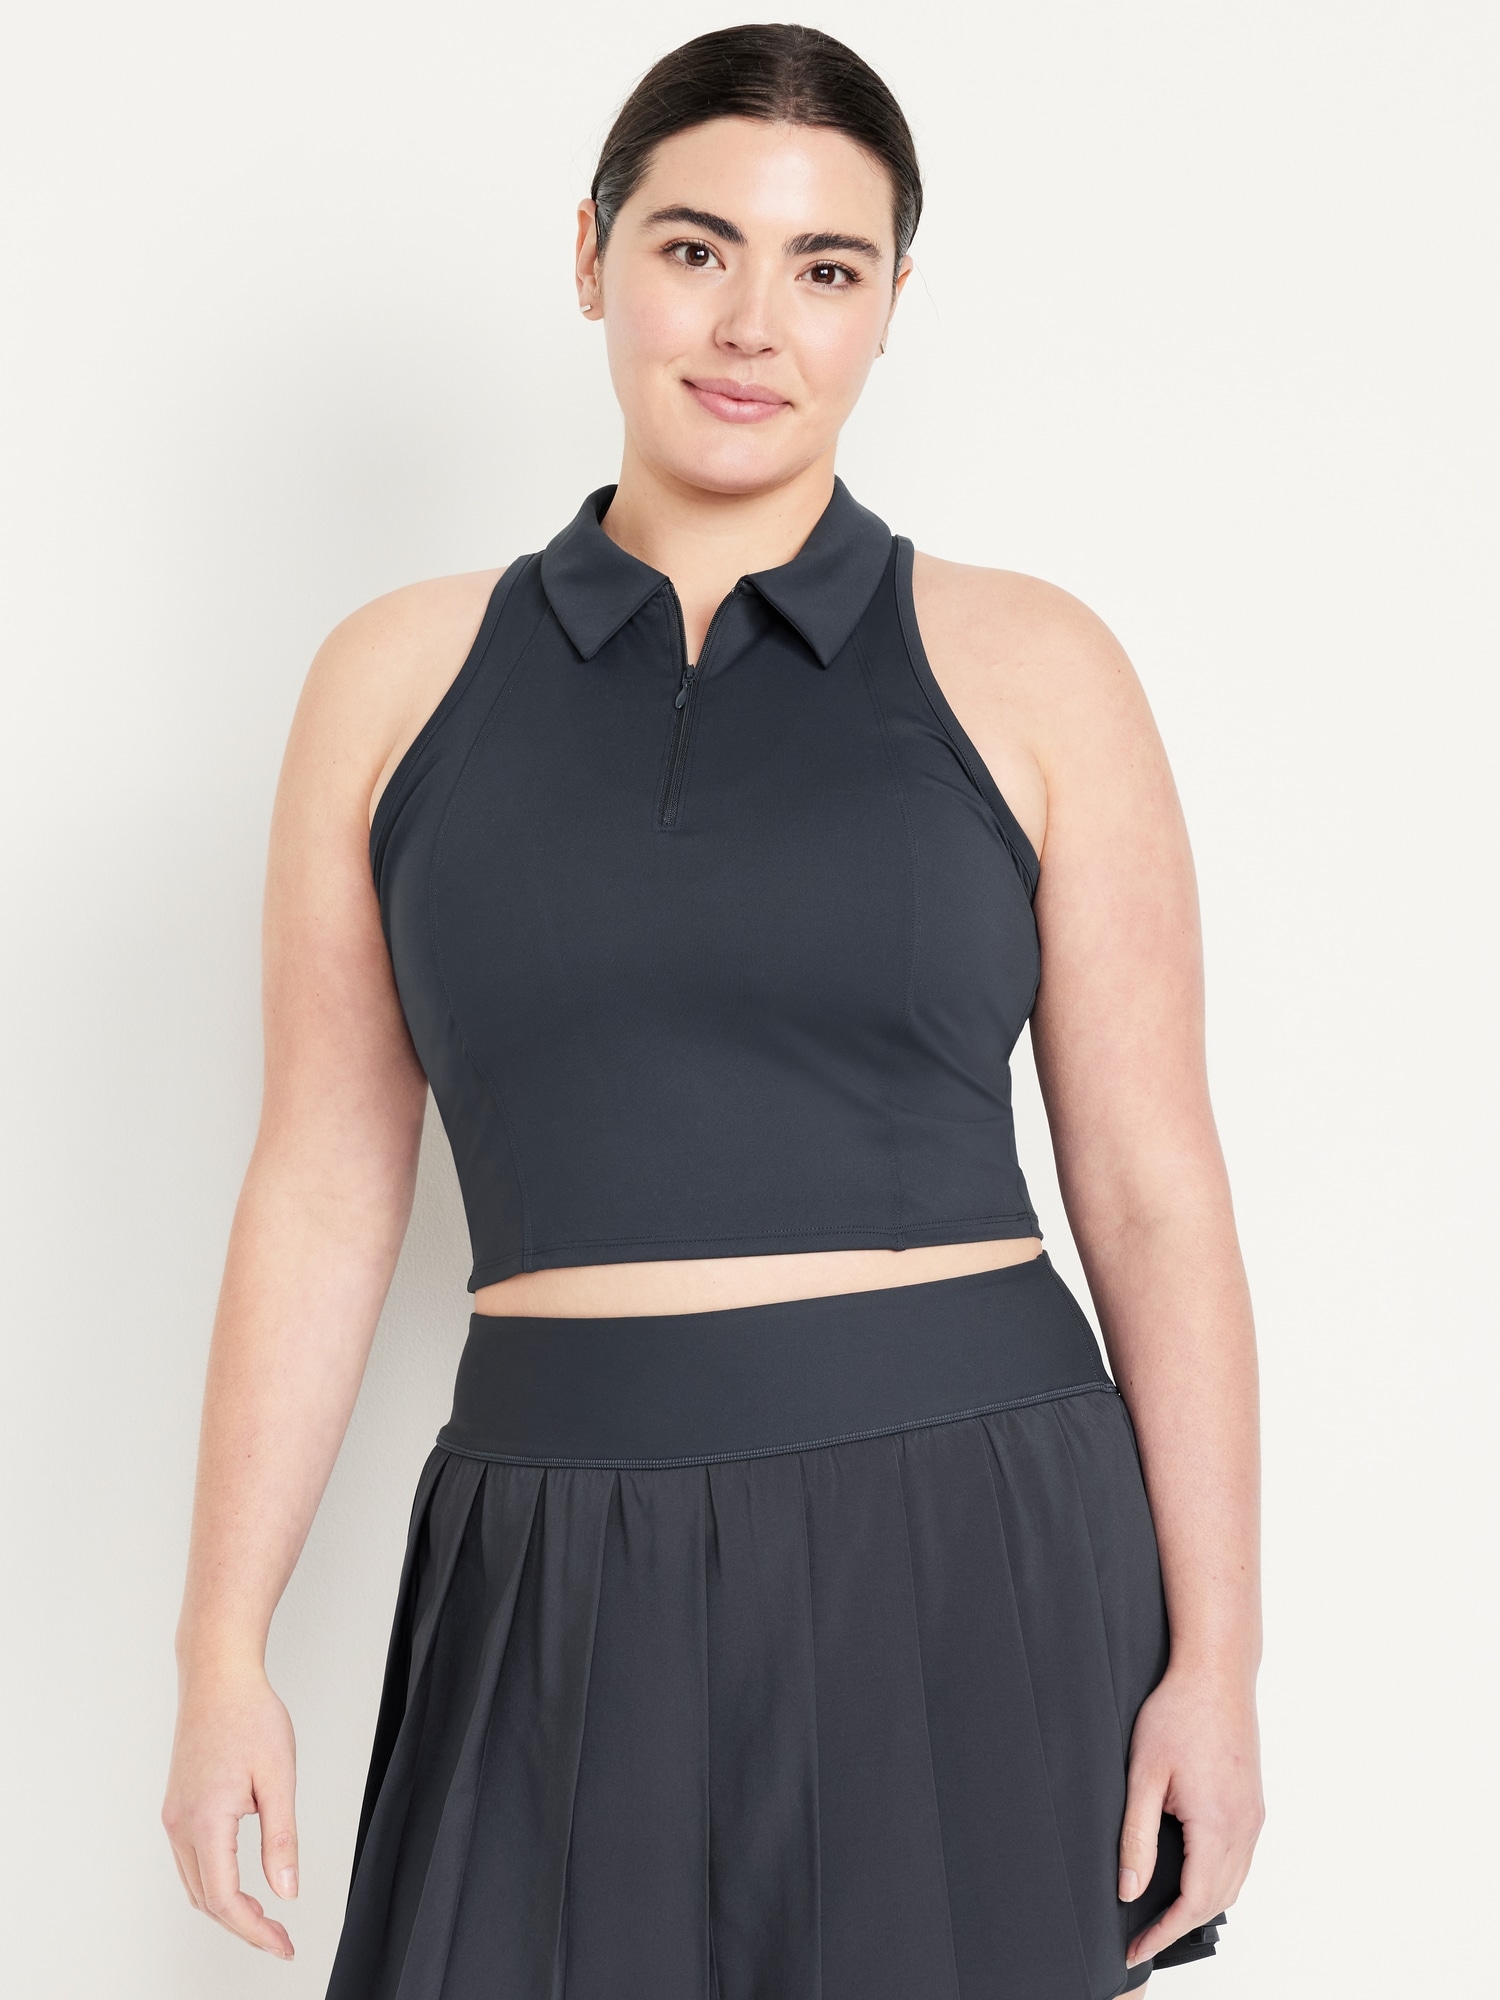 PowerSoft Cropped Top for Women